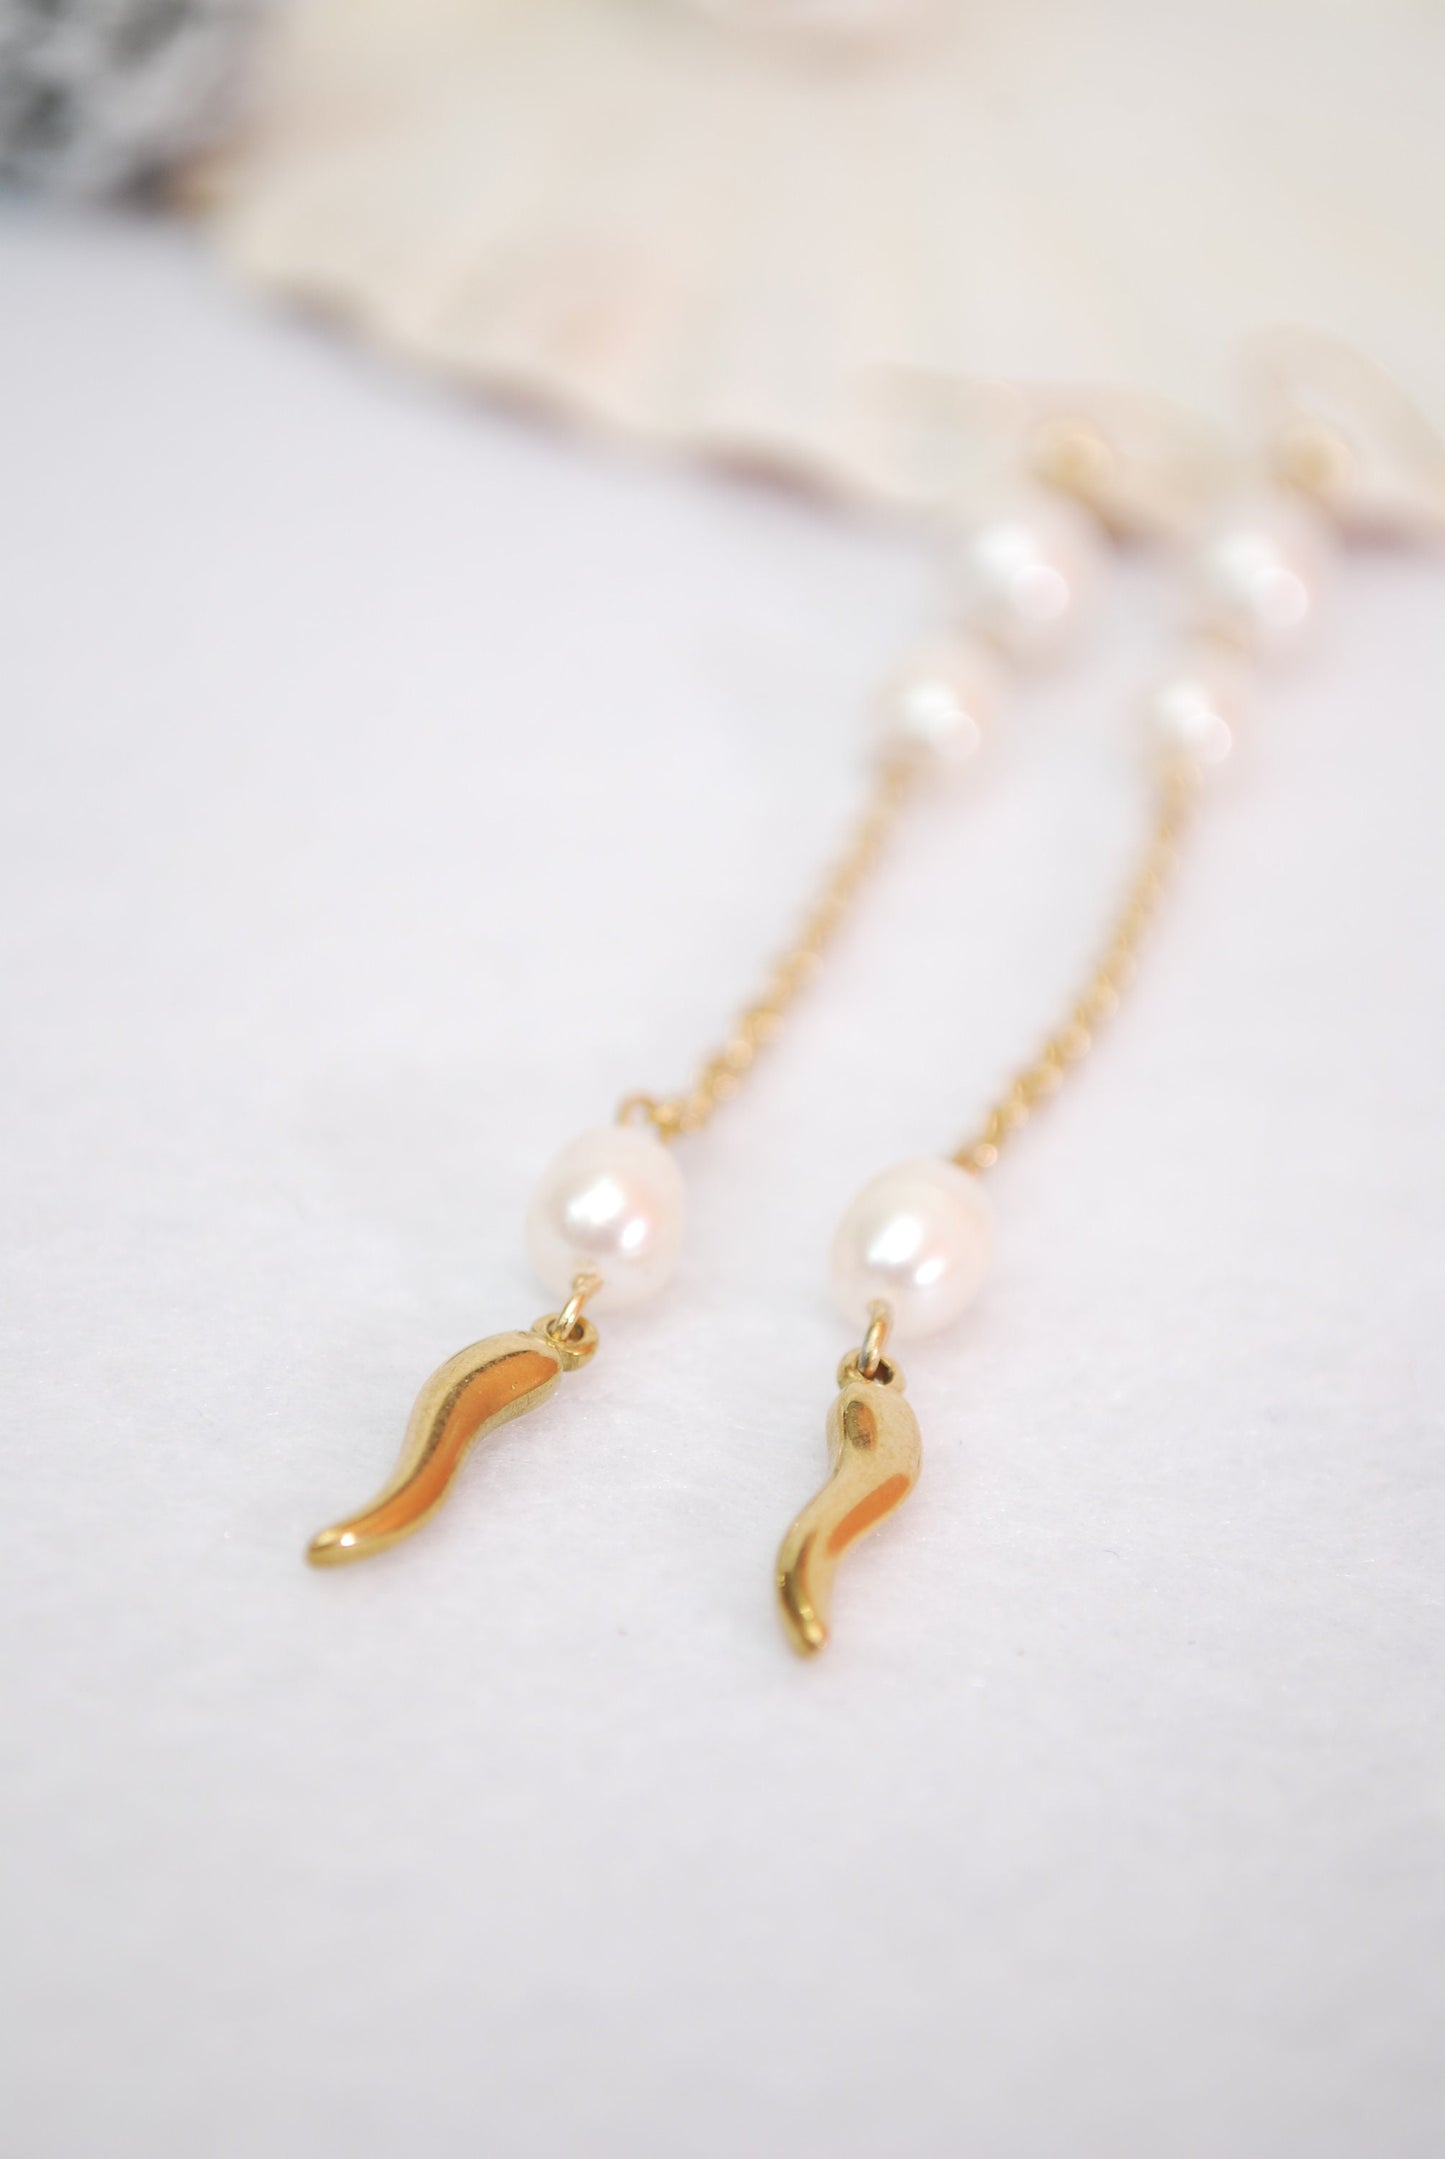 Ascetic Rustic Bohemian Earrings with Freshwater Pearls and Gold Plated Stainless Steel - 4 Inches Long